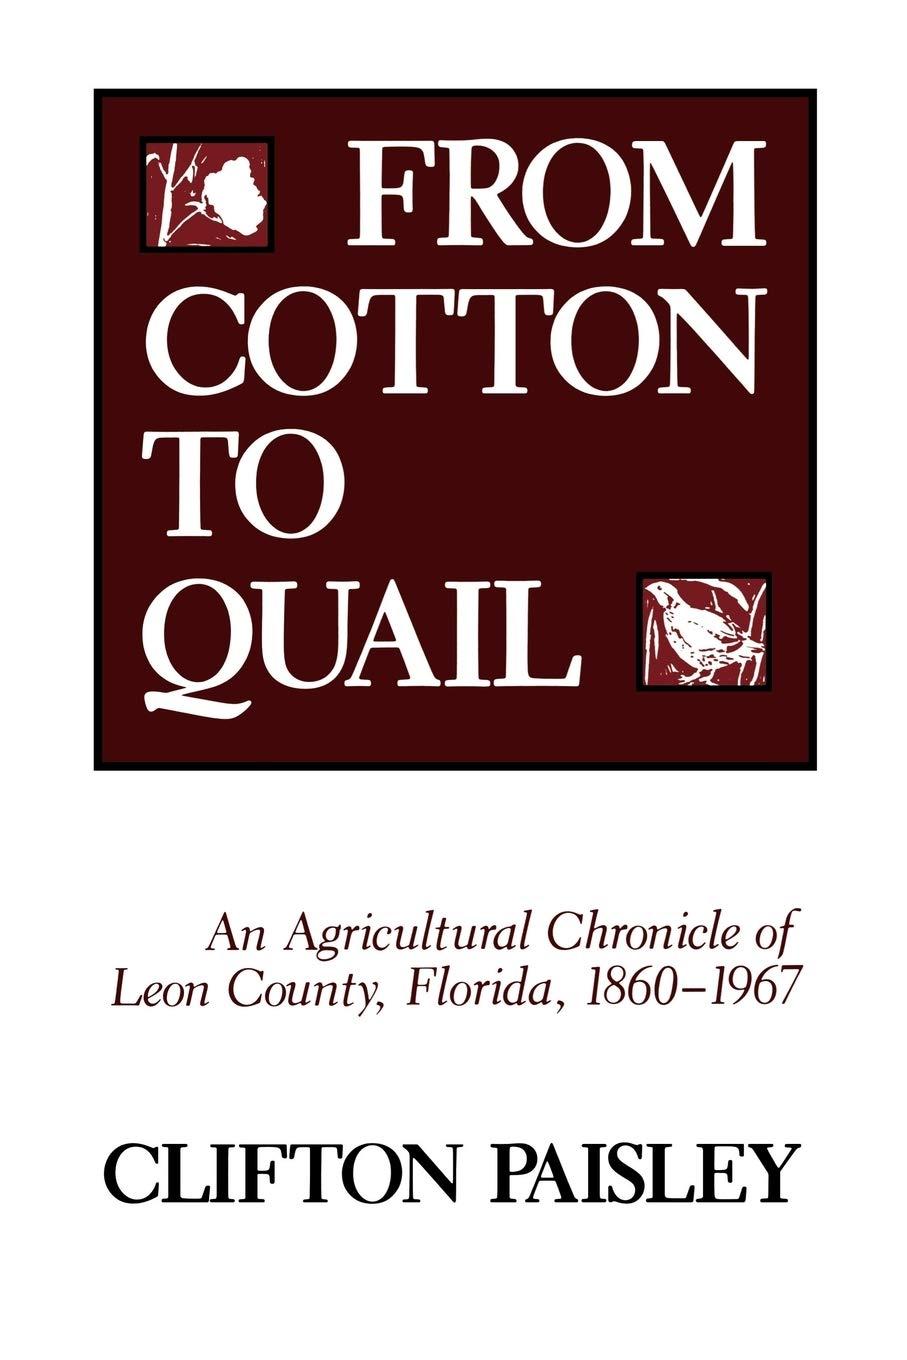 from cotton to quail an agricultural chronicle of leon county florida 1860 1967 1st edition clifton paisley